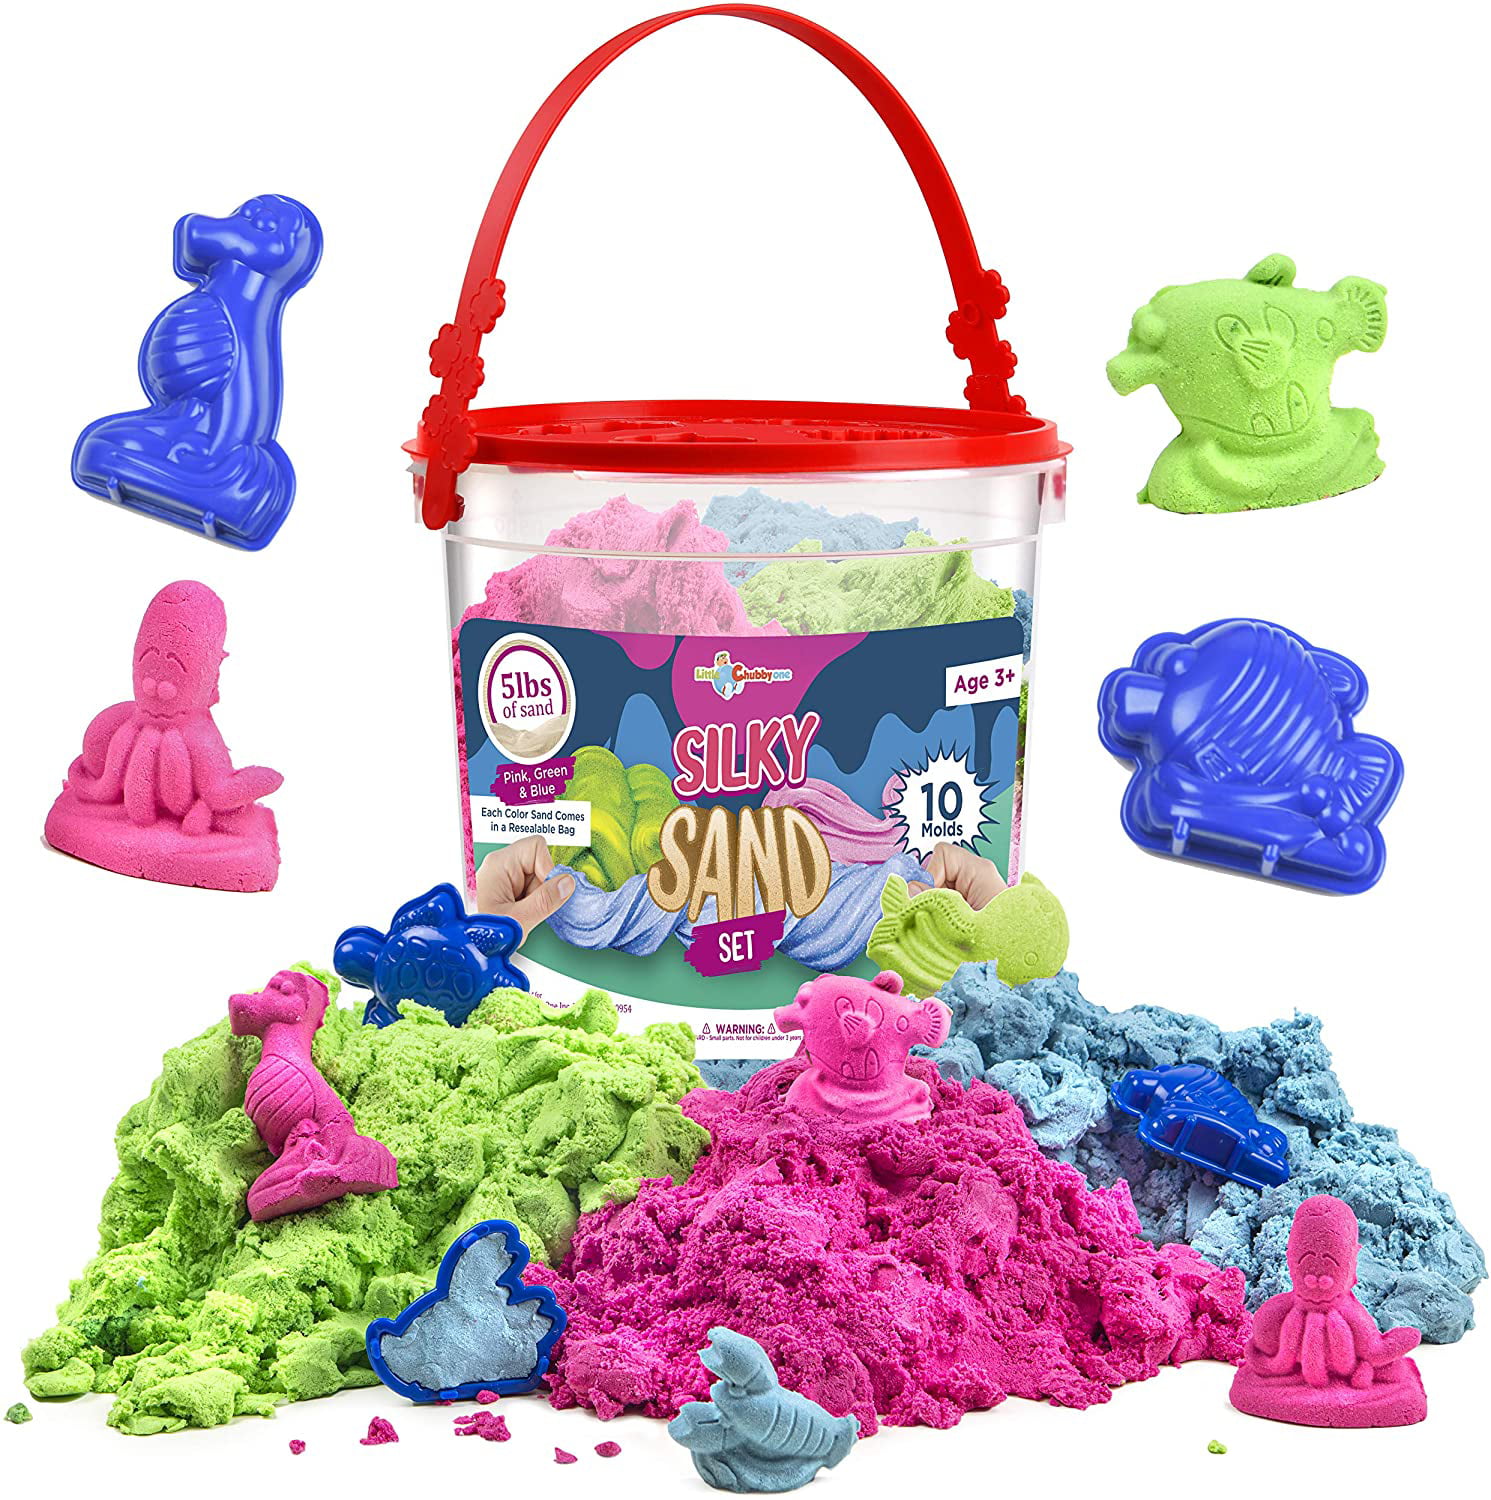 Toy Magic Sand Set Includes 12 Eggs with Sand Plus Dinosaur Surprise Sensory Toy for Girls and Boys Age 2 3 4 5 6 7 8 9 10 LITTLE CHUBBY ONE Kids Velvet Play Sand Dino Egg Set